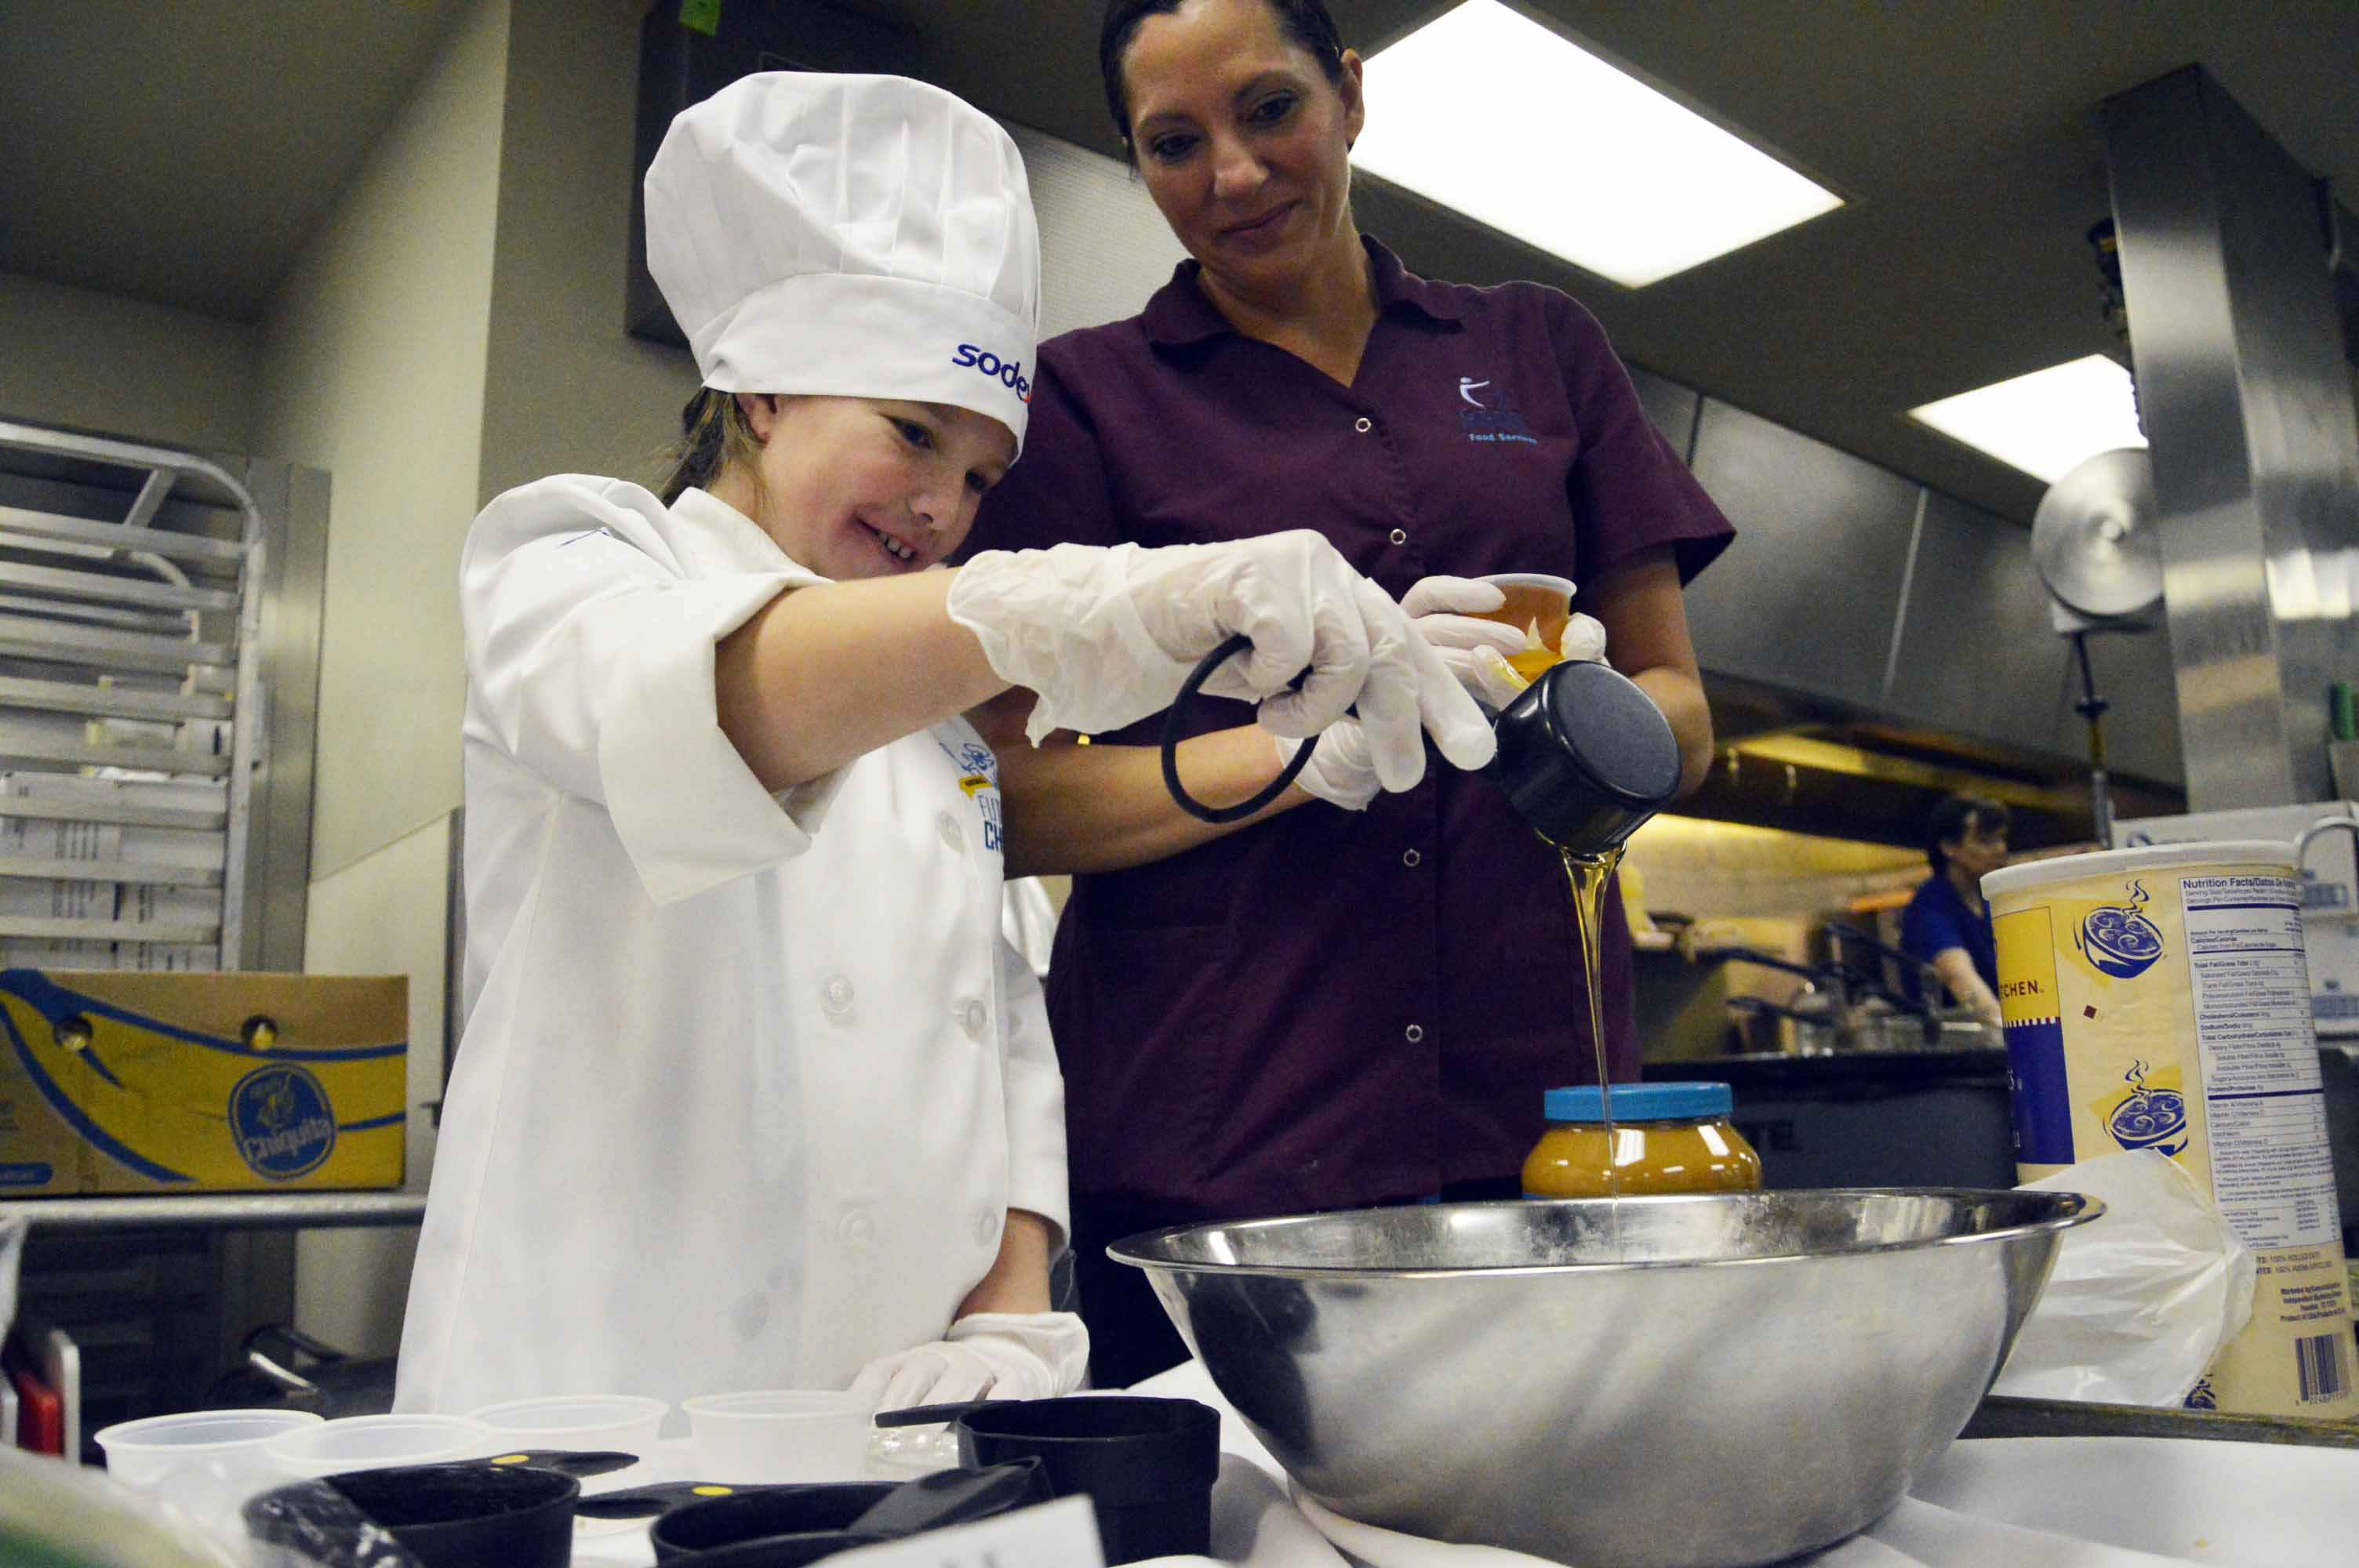 Fourth-grade chefs go head-to-head in regional culinary competition